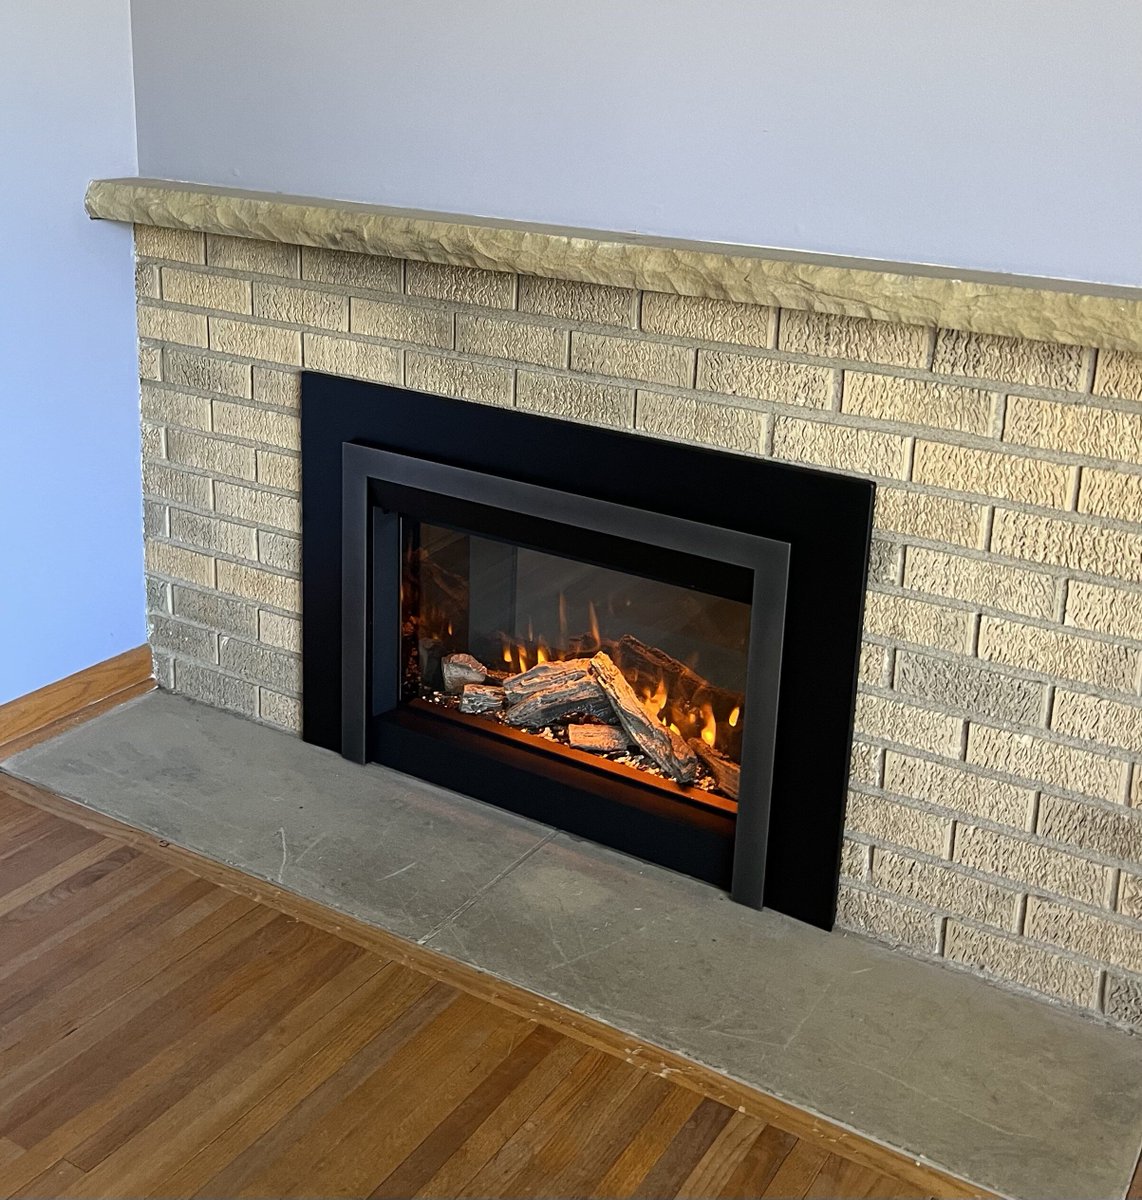 Looking for a fast and easy solution to your fireplace renovation project? Consider an #electricfireplace. 

🔥 Ready to upgrade your masonry fireplace without the hassle? Look no further than the Valor electric. #fireplaceupgrade #electricfireplace #hasslefree #cozyhome 🔥